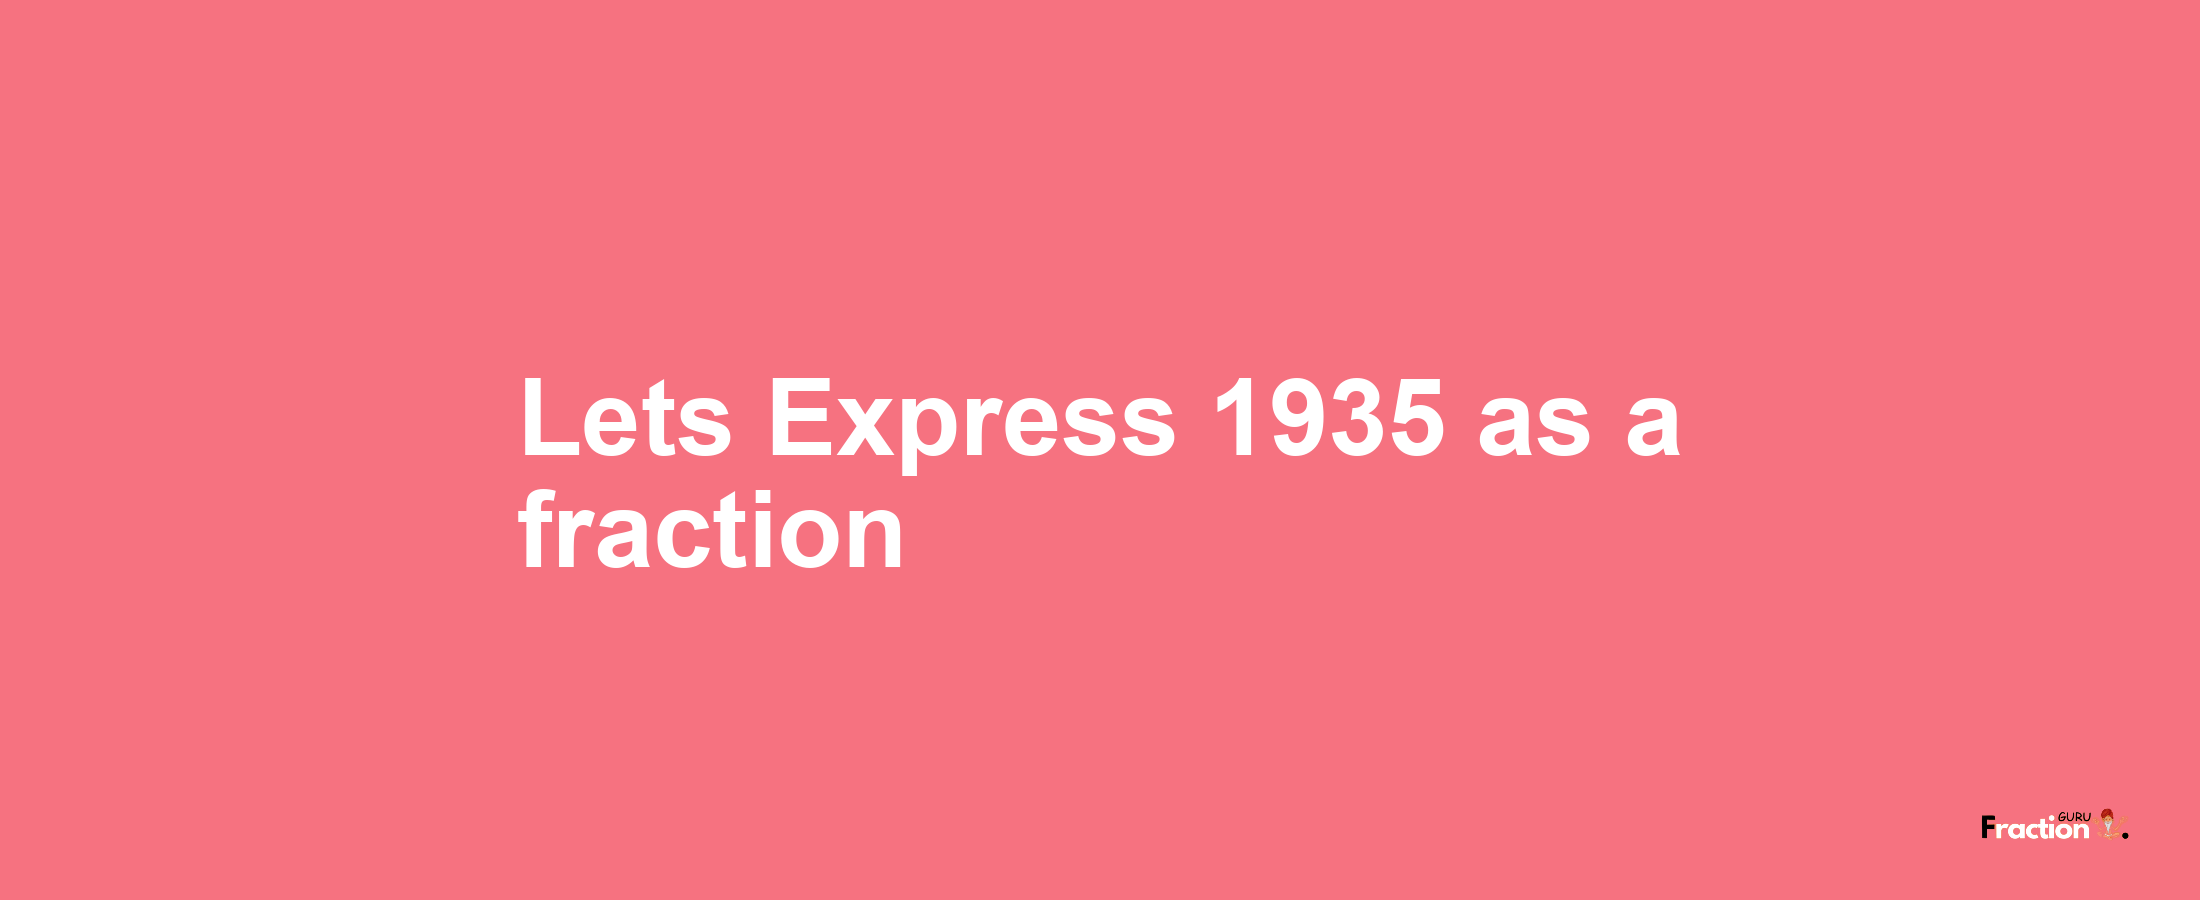 Lets Express 1935 as afraction